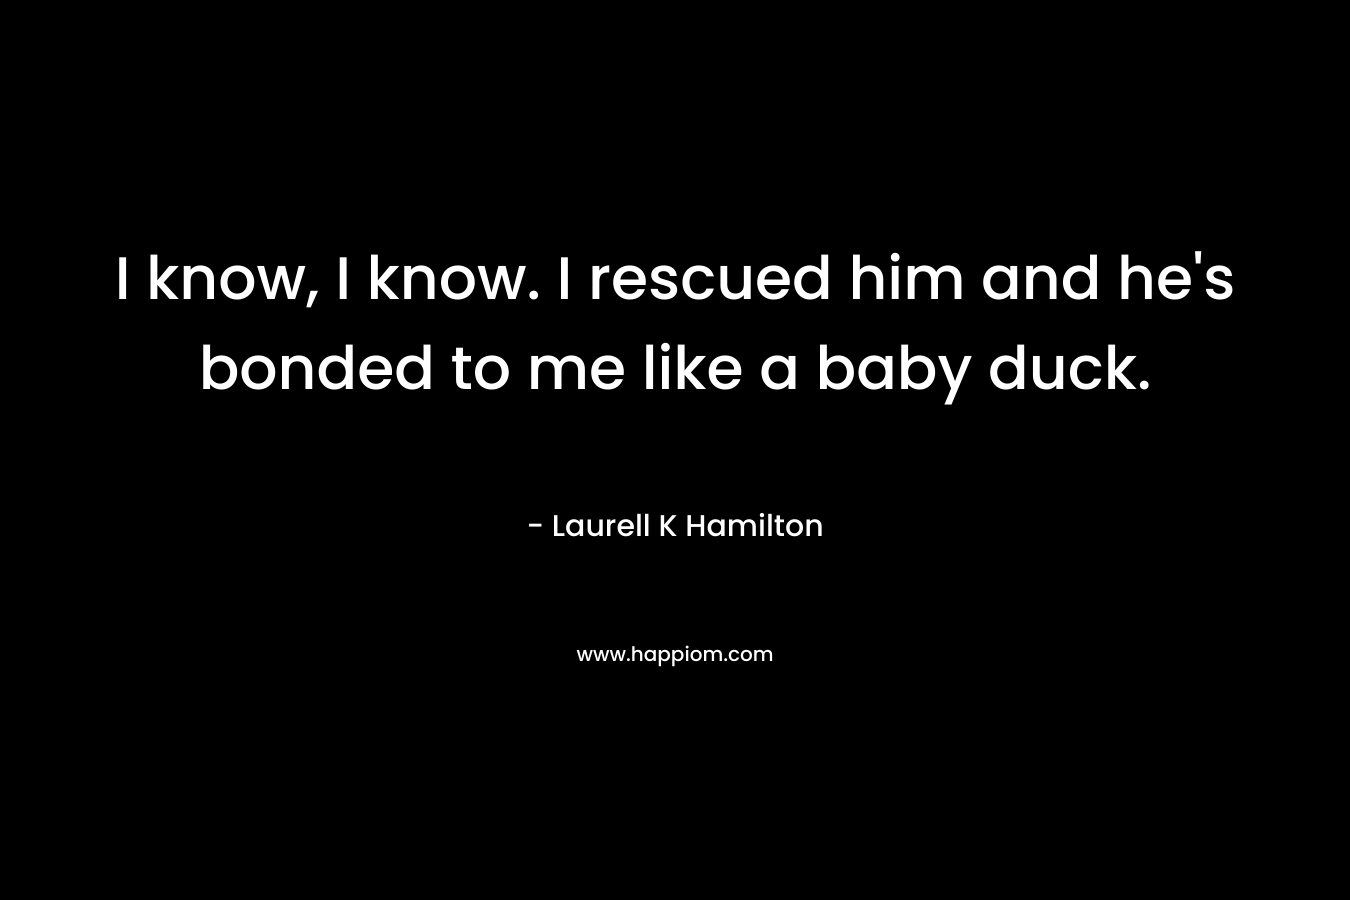 I know, I know. I rescued him and he’s bonded to me like a baby duck. – Laurell K Hamilton